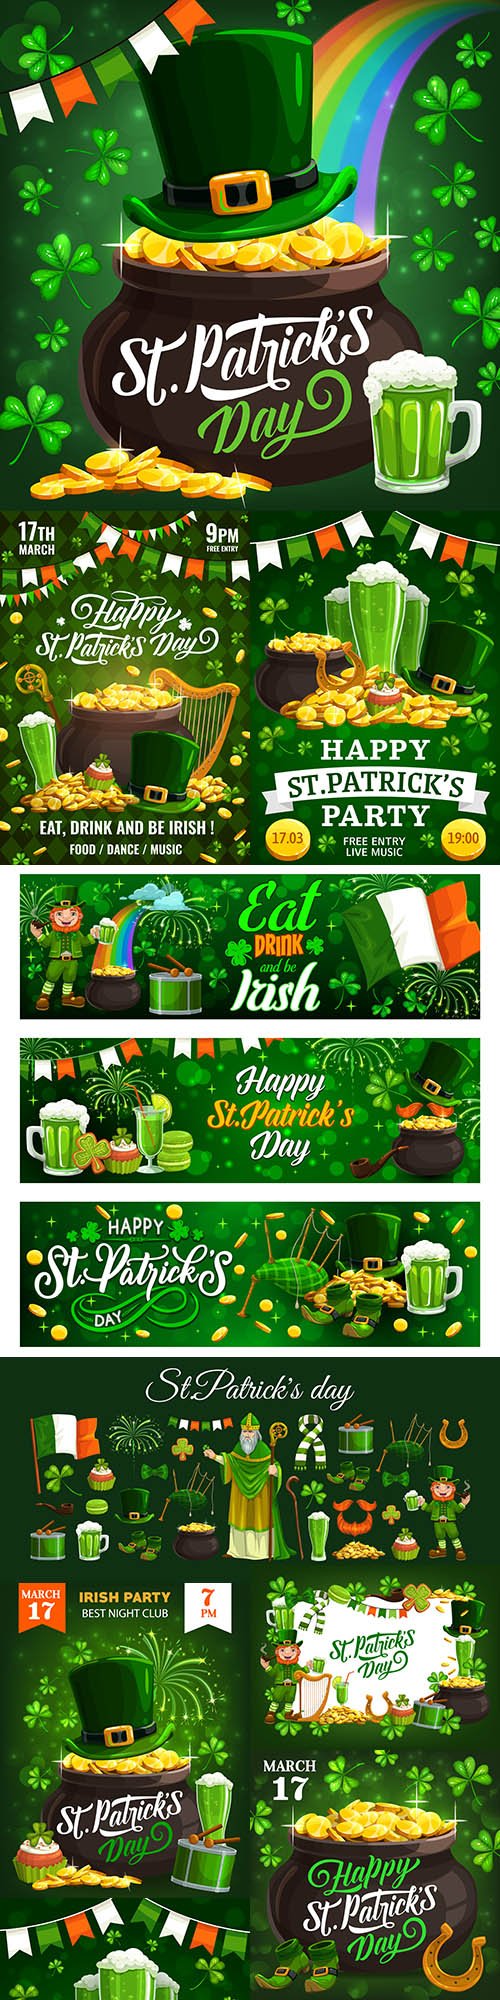 St. Patrick's Day party design vector illustrations 6